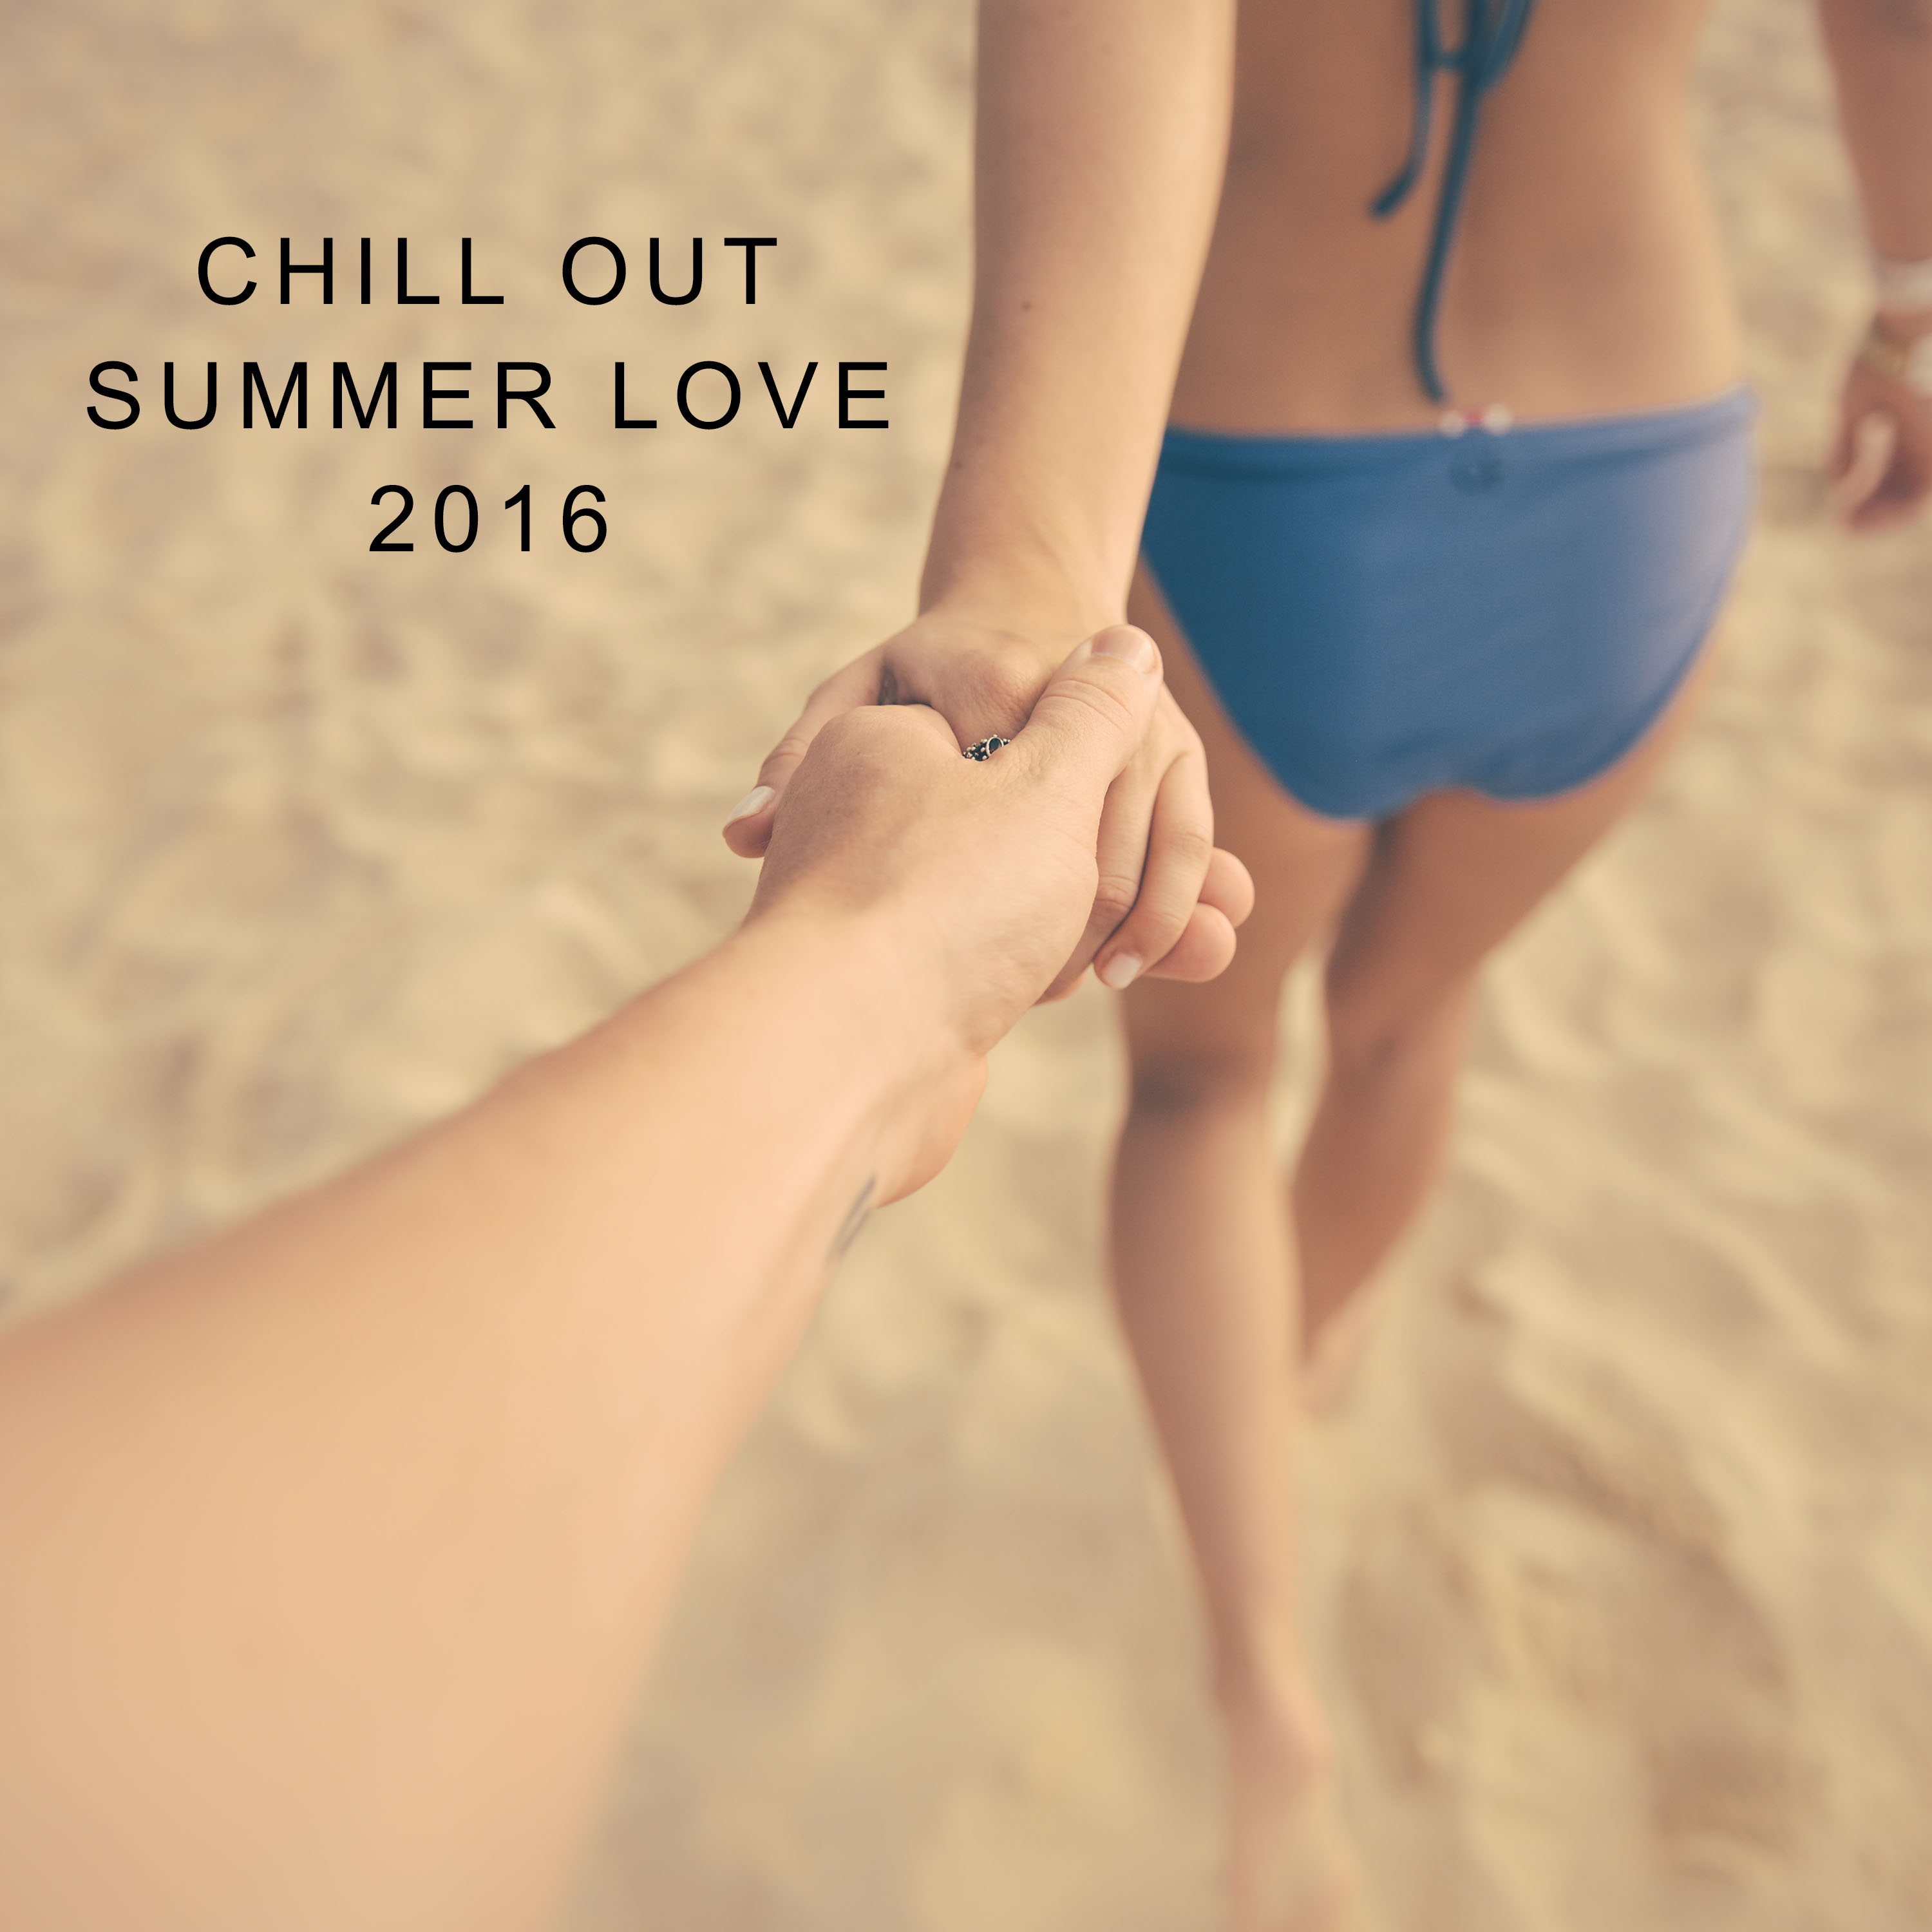 Chill Out Summer Love 2016